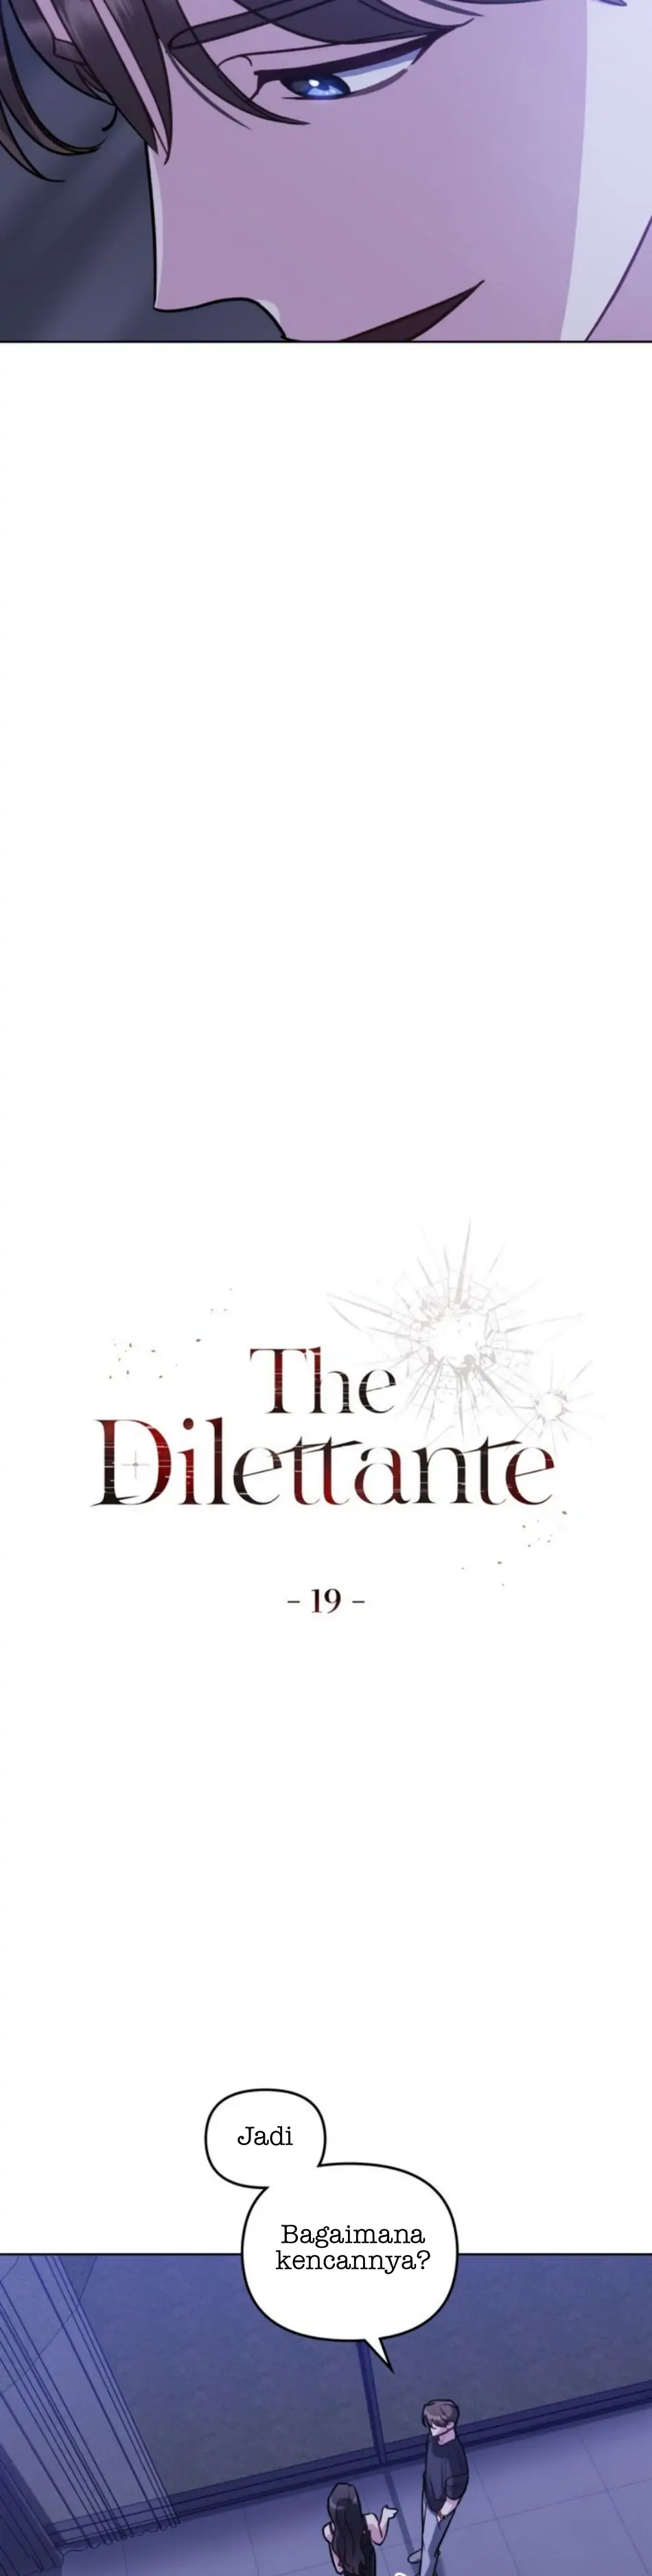 The Dilettante - 19 page 10-75f65713